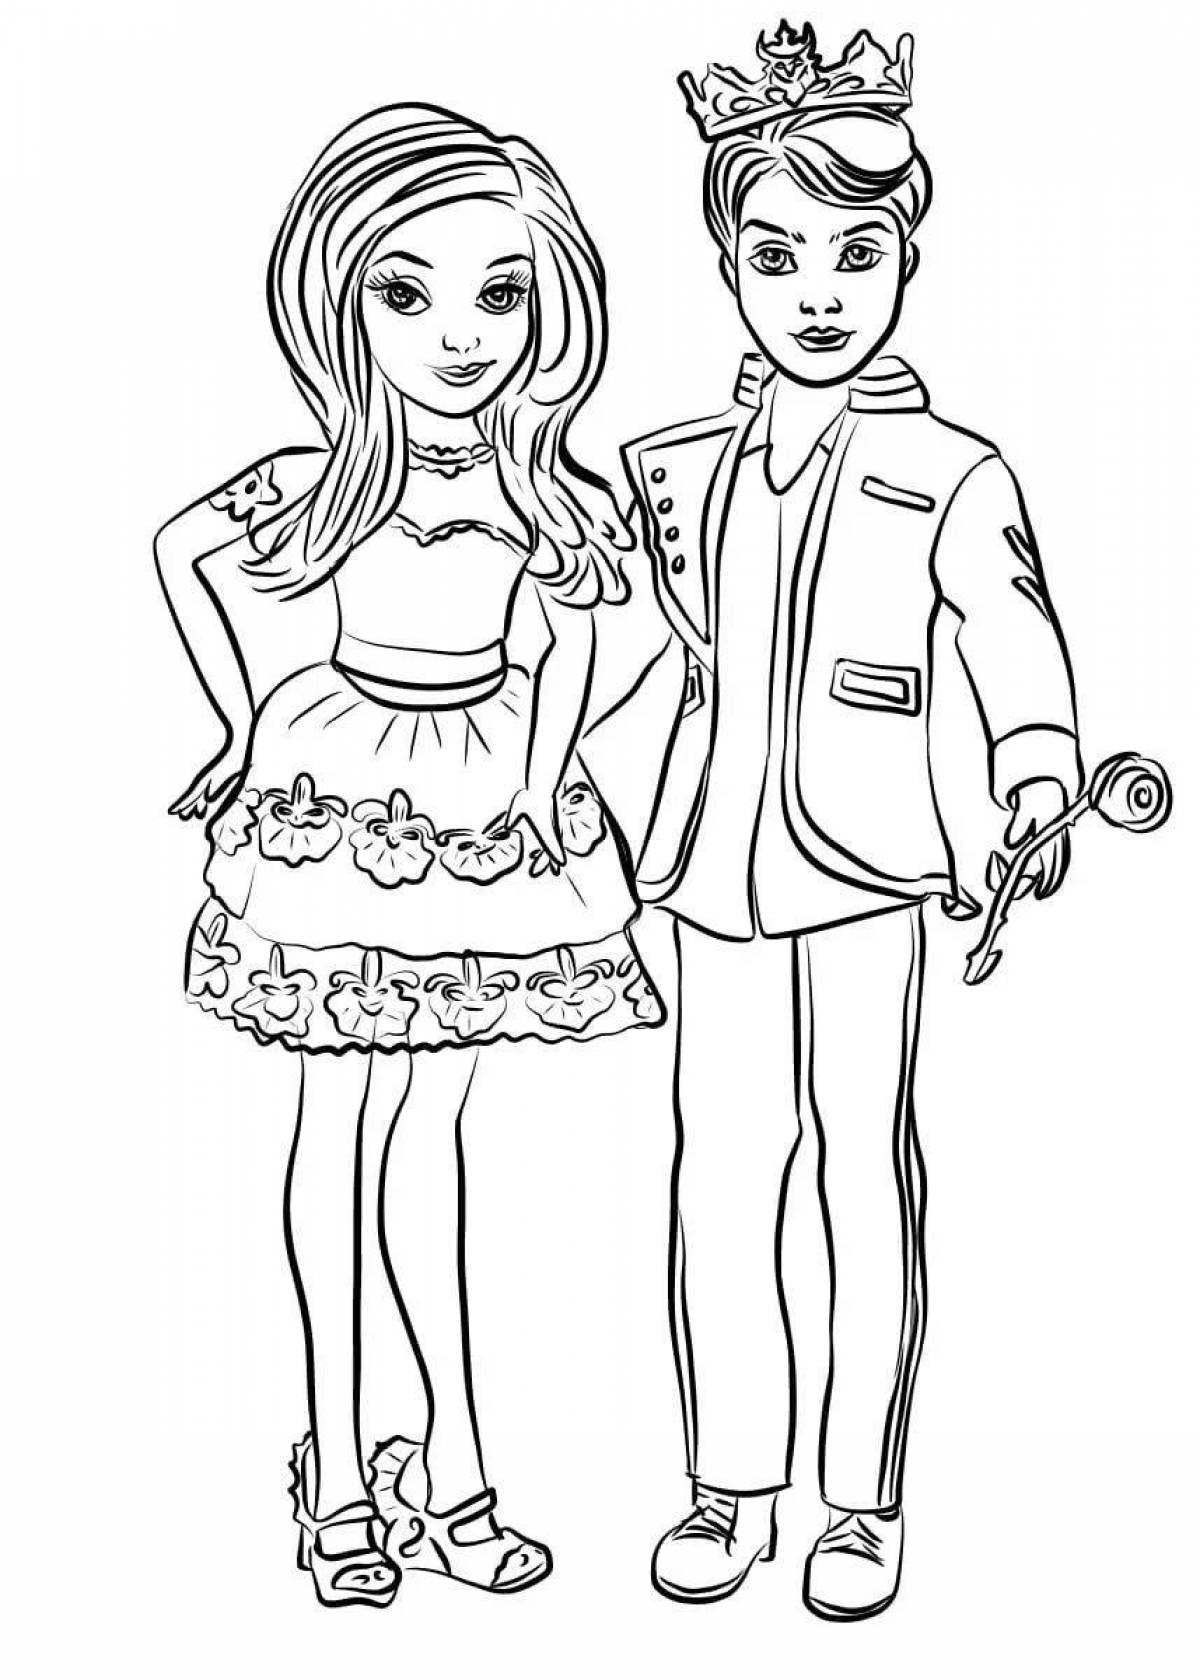 Splendid heirs coloring page